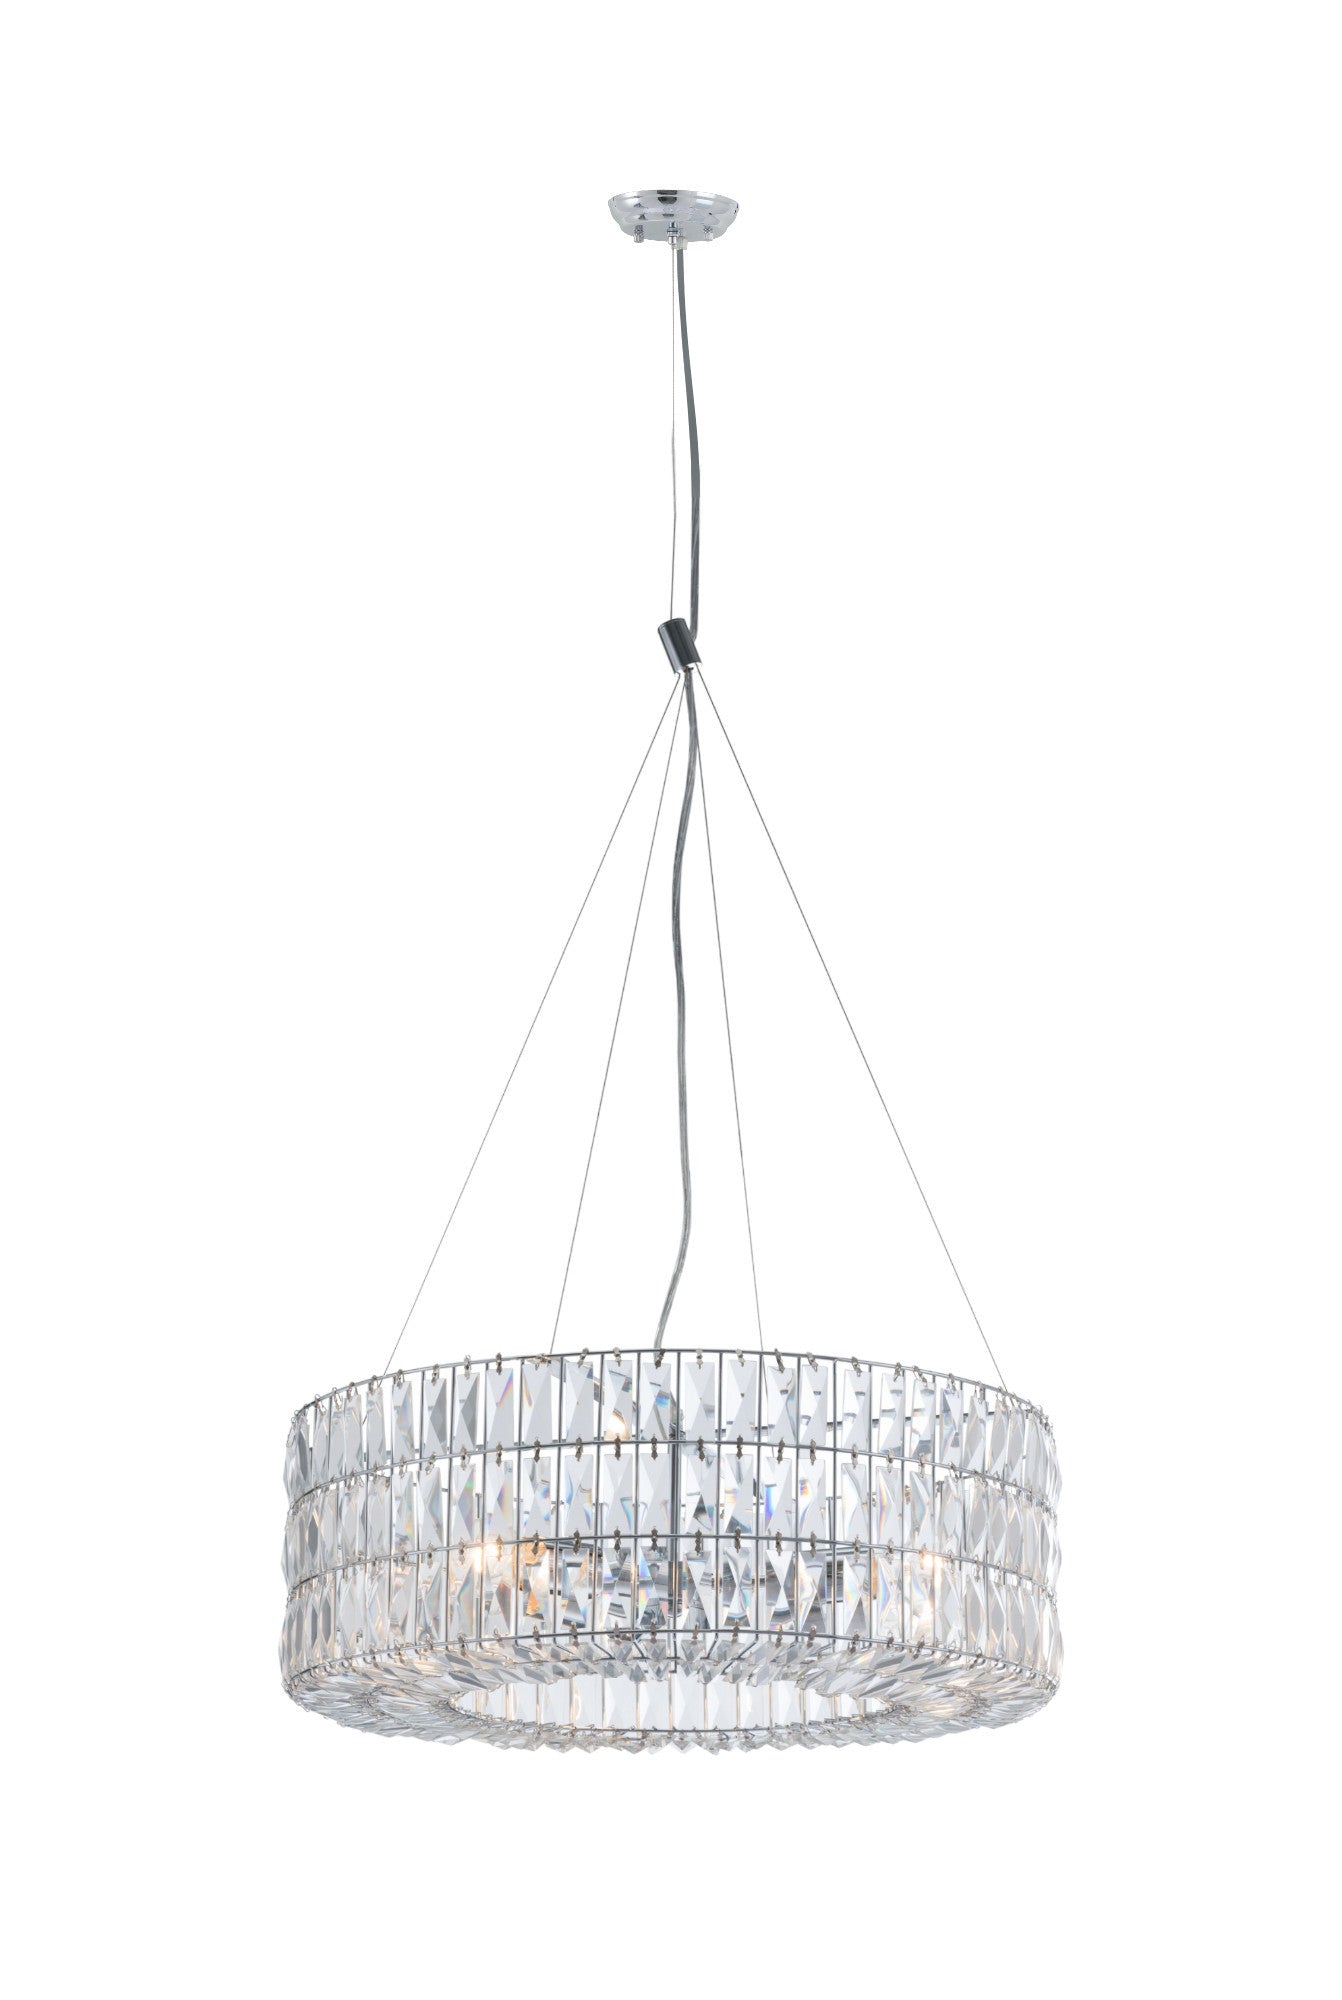 Mod Chrome and Crystal Bling Chandelier